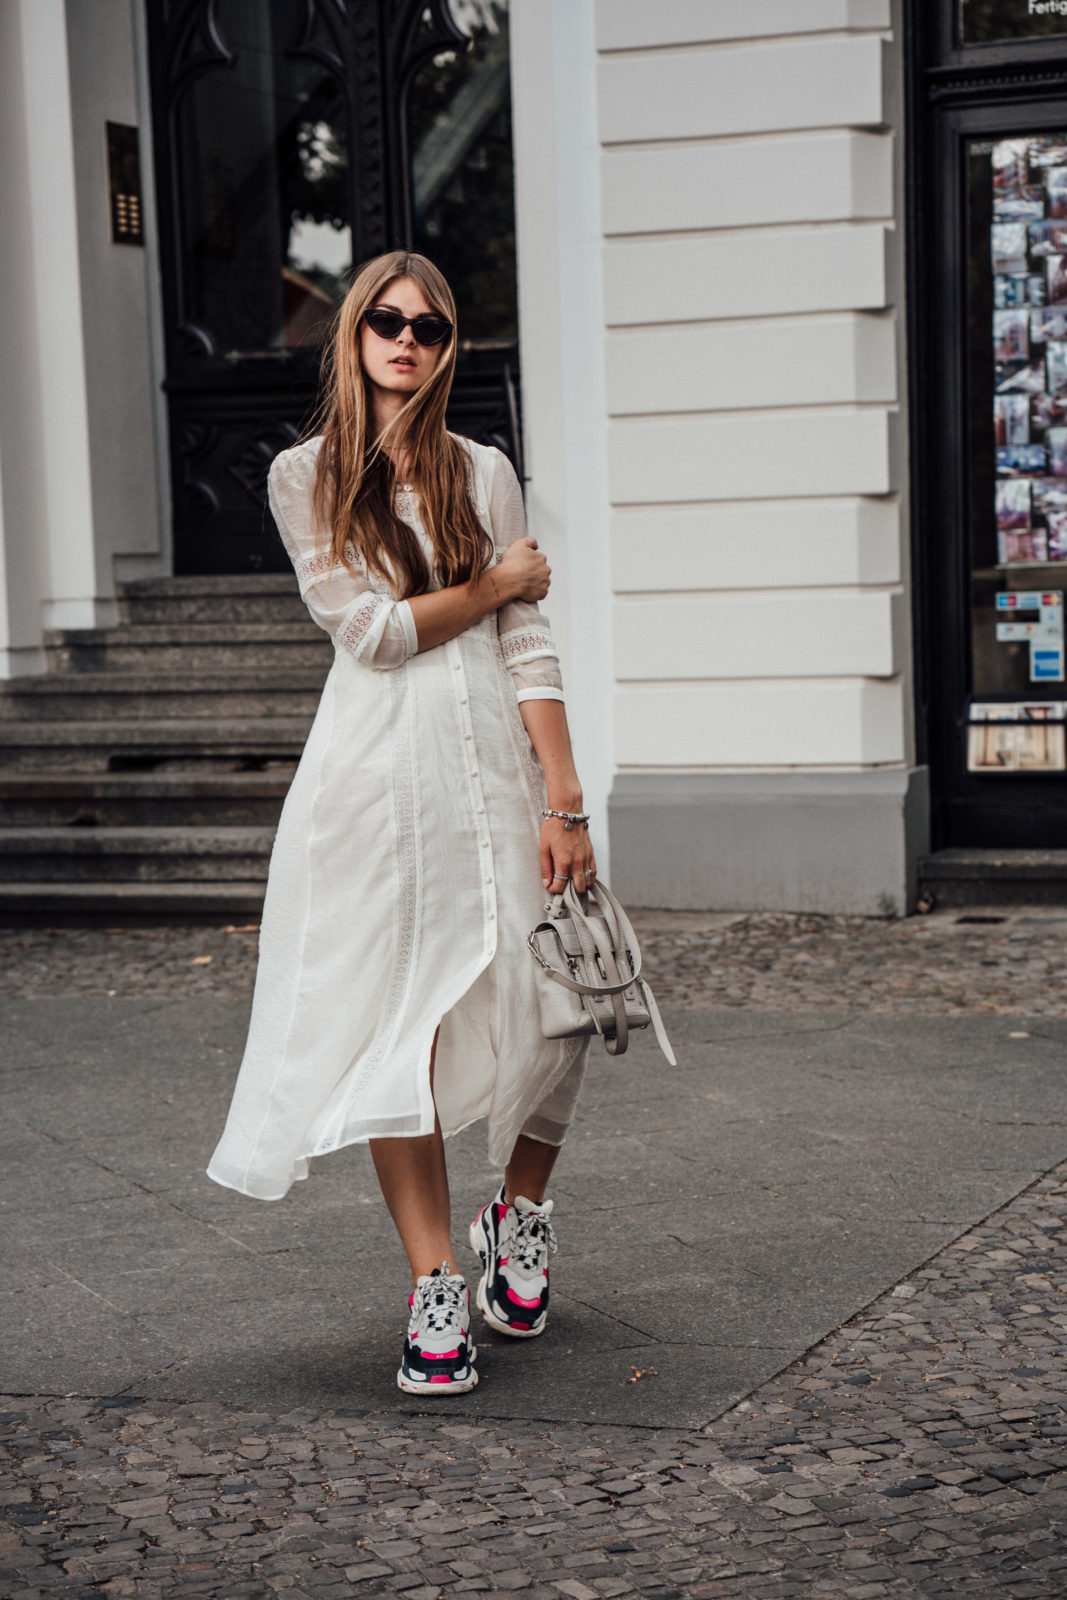 Summer Outfit: Combining dresses with ugly sneakers || Fashionblog